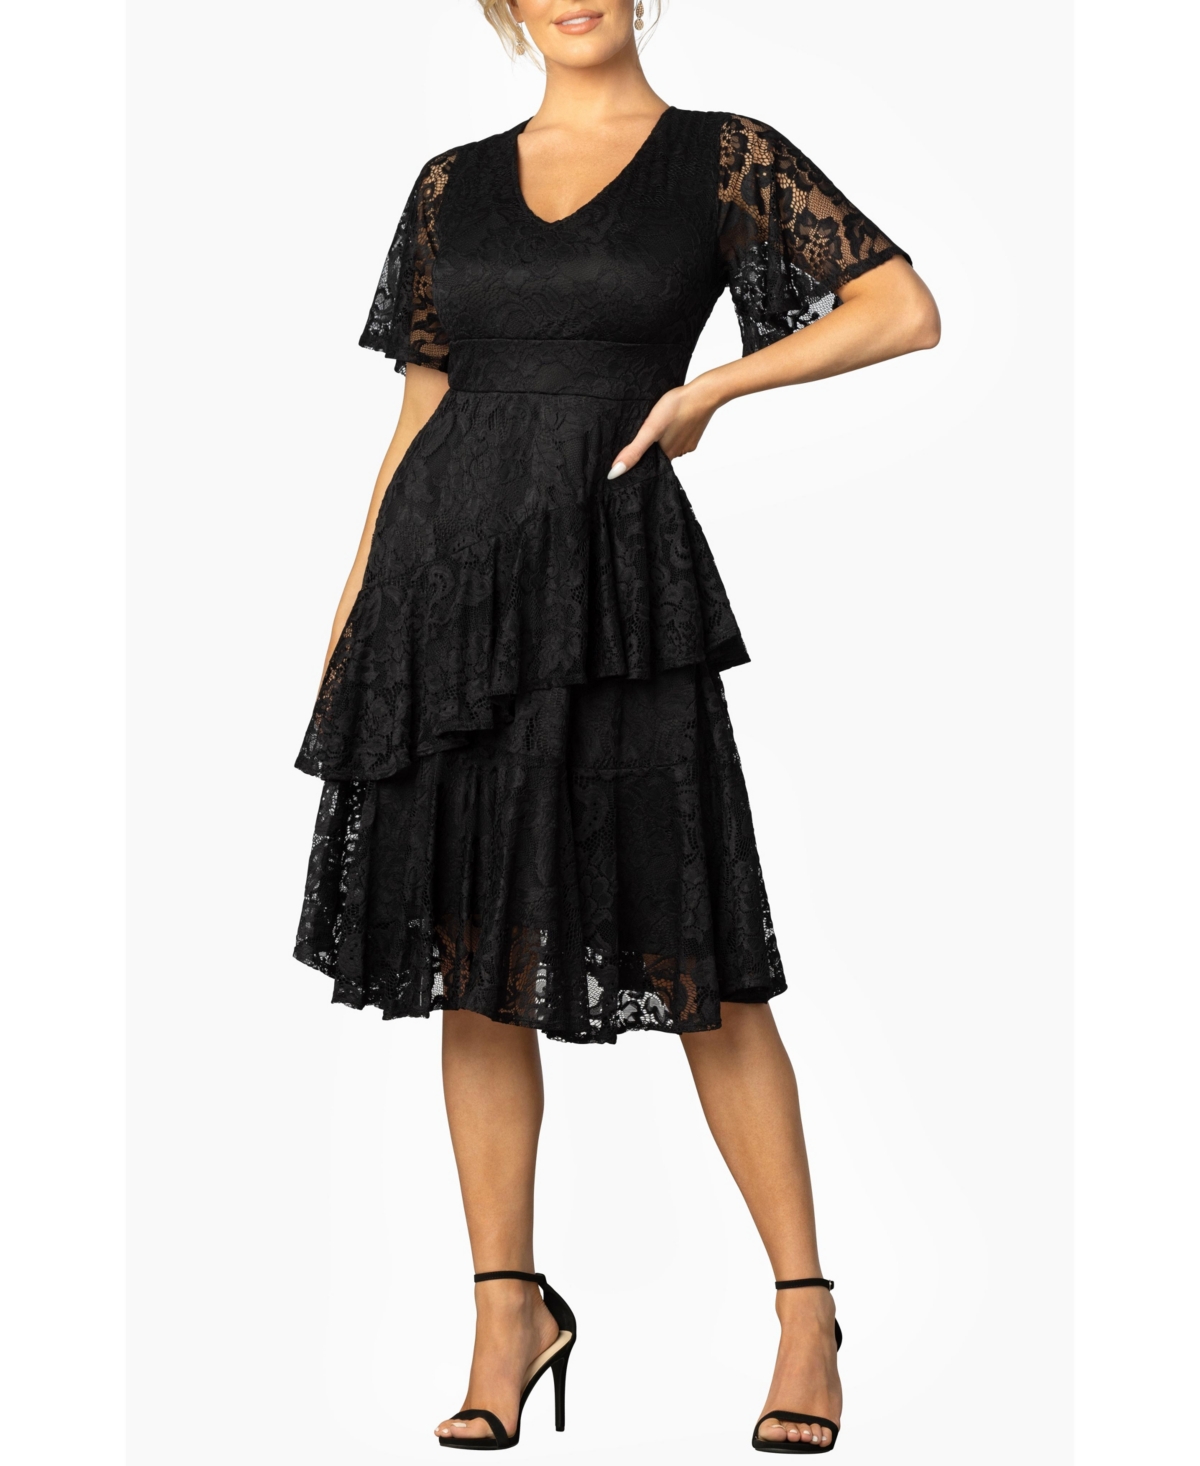 Women's Lace Affair Tiered Cocktail Dress - Onyx